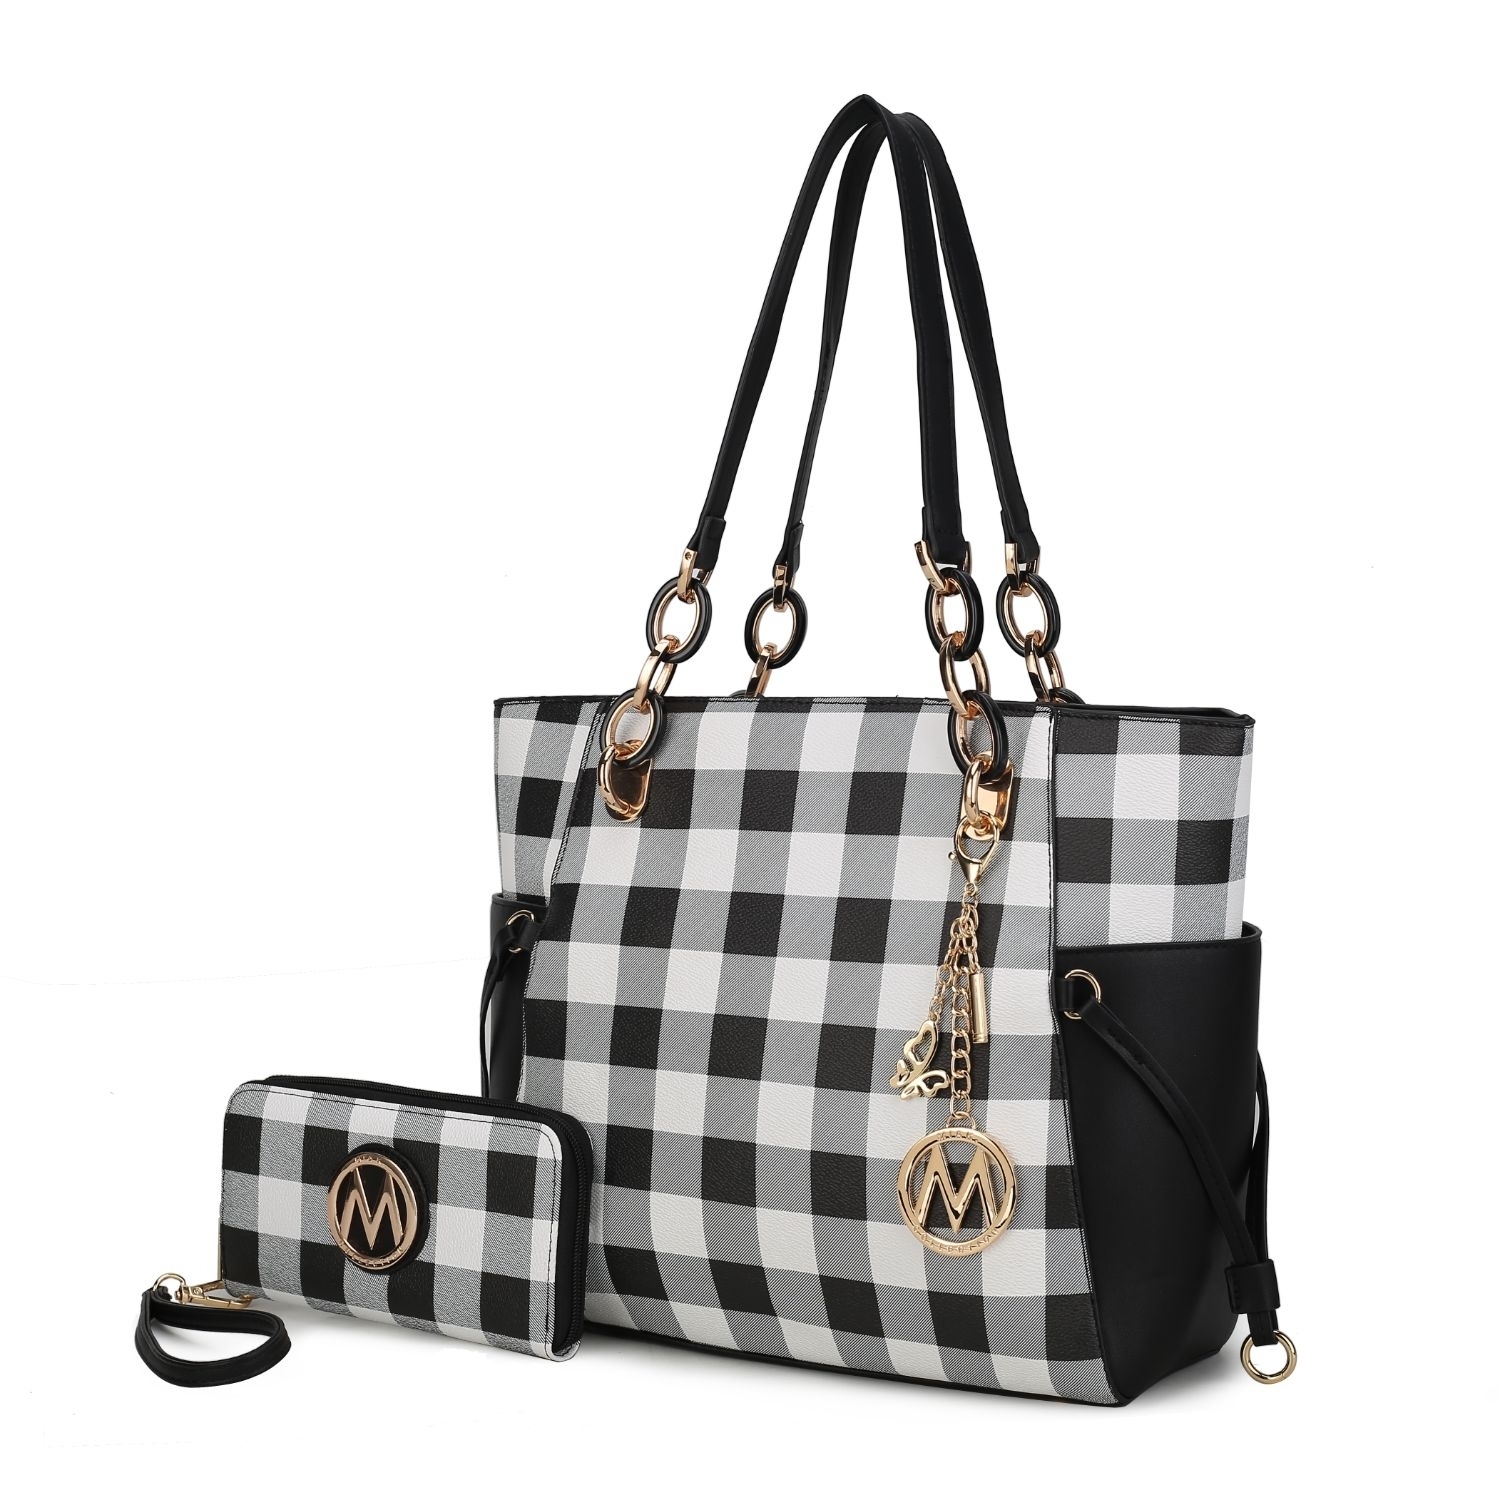 MKF Collection Yale Checkered Tote Handbag With Wallet By Mia K. - Navy